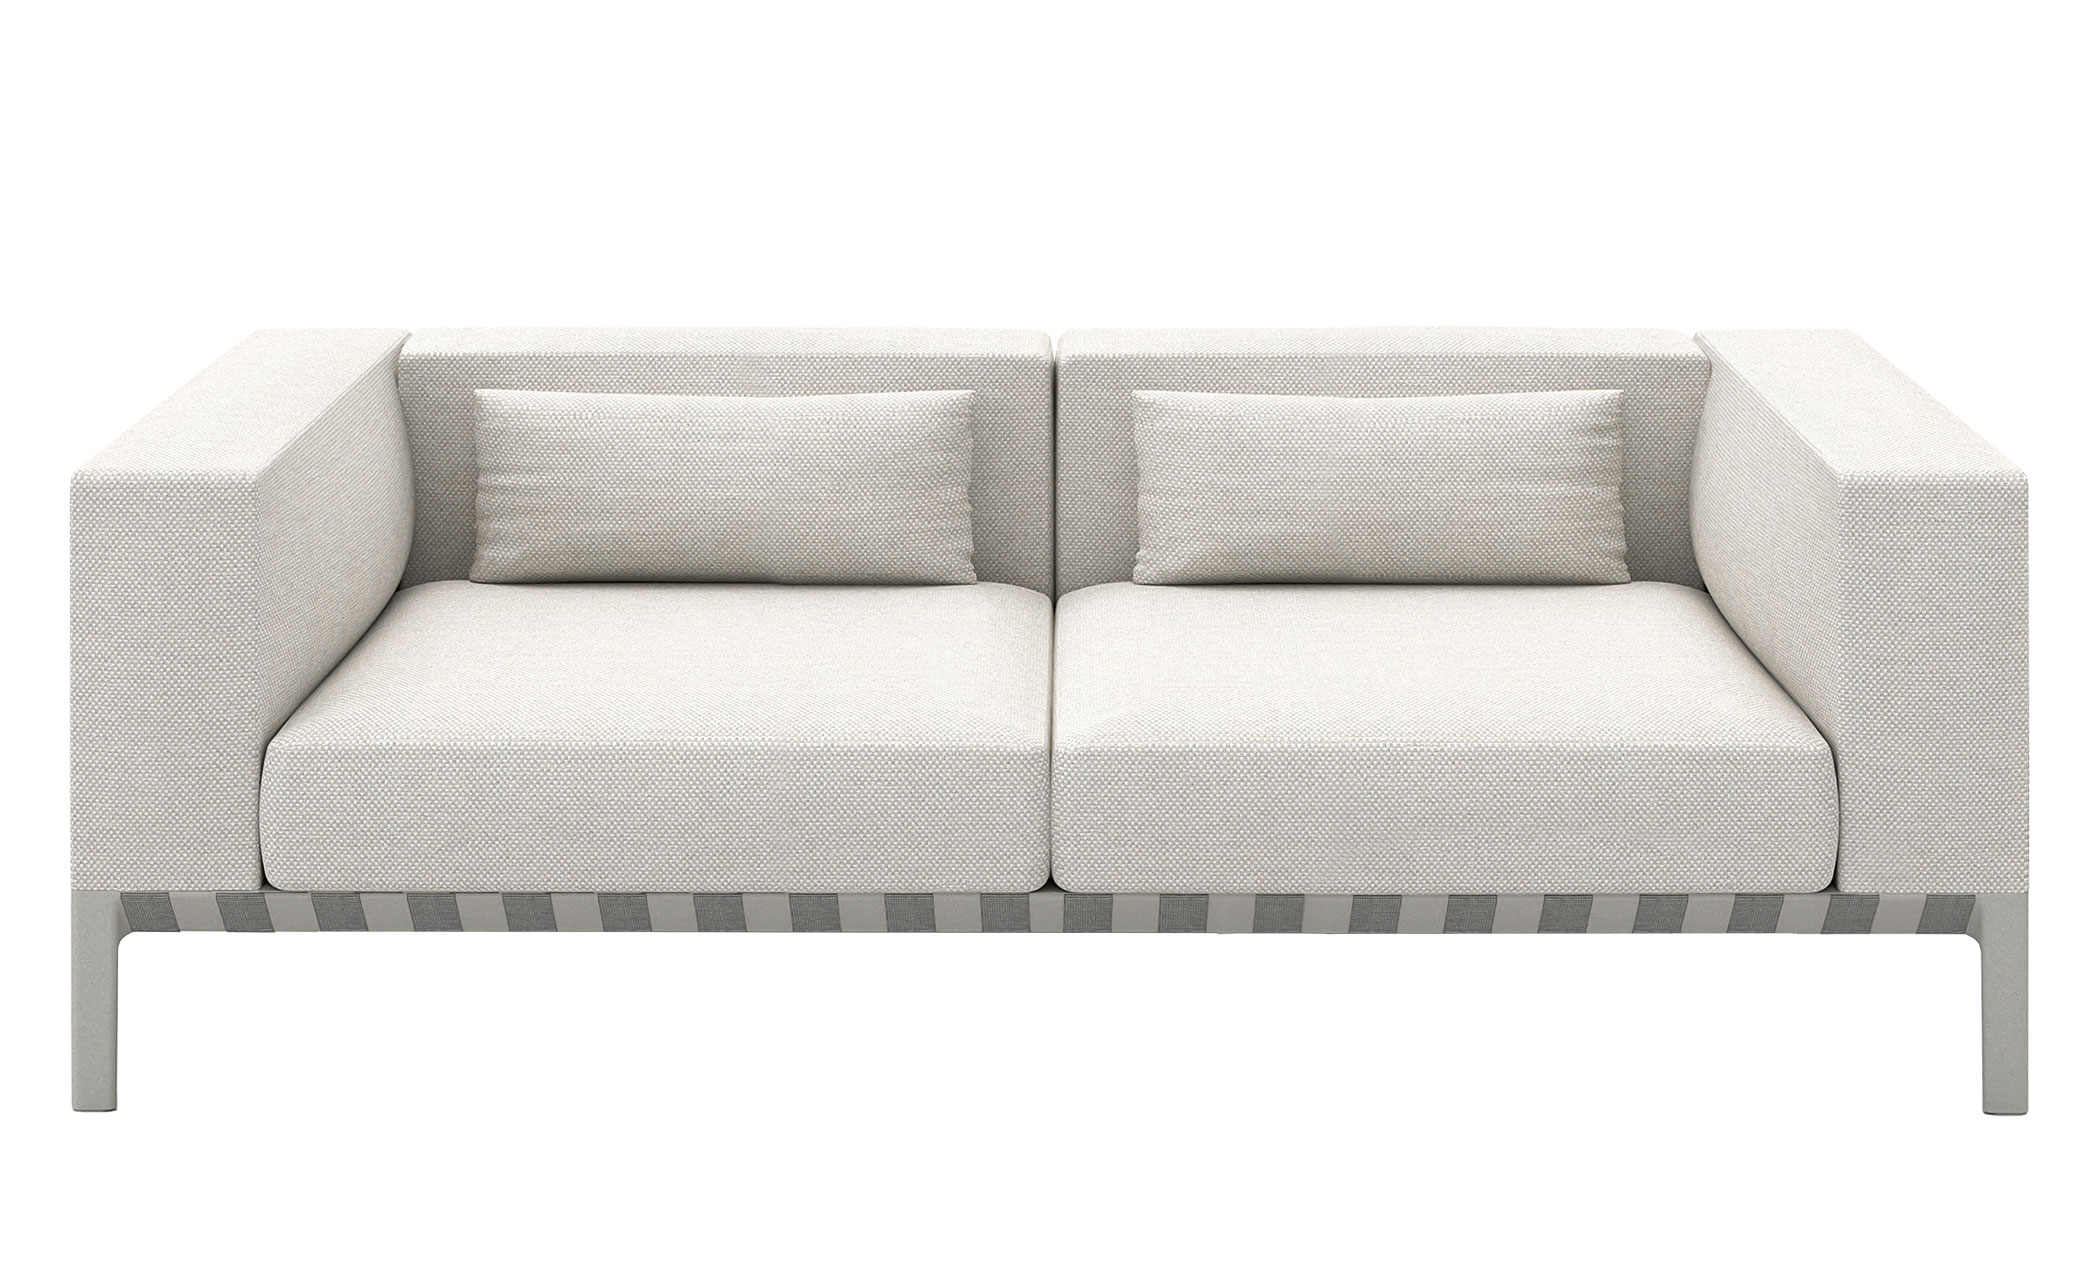 Able Outdoor 80 Inch Sofa With Arms Hive